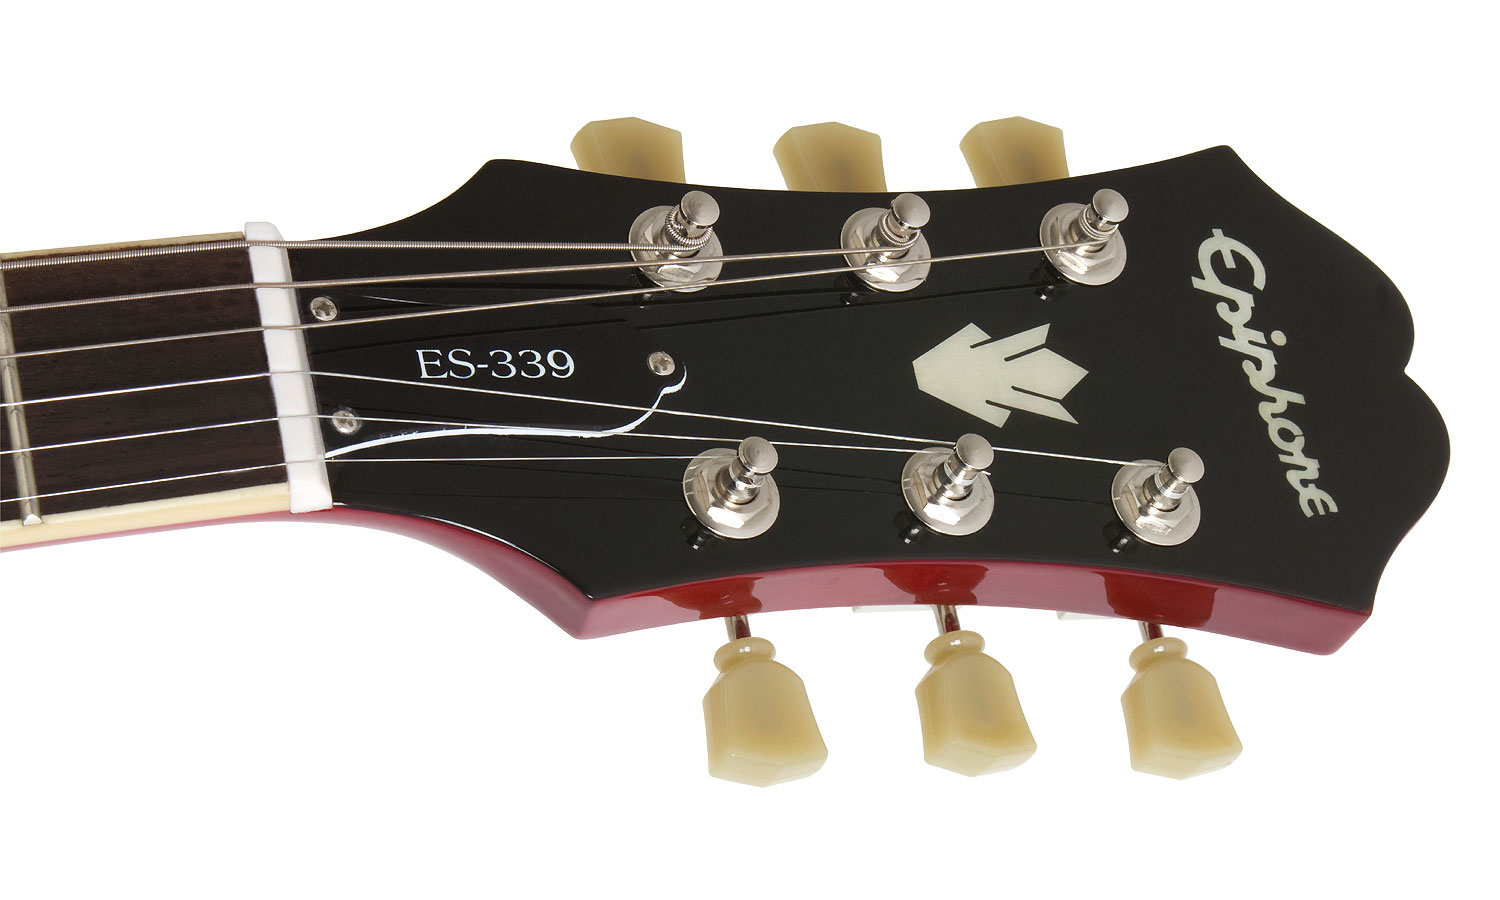 Epiphone Es-339 Inspired By Gibson 2020 2h Ht Rw - Cherry - Guitarra eléctrica semi caja - Variation 2